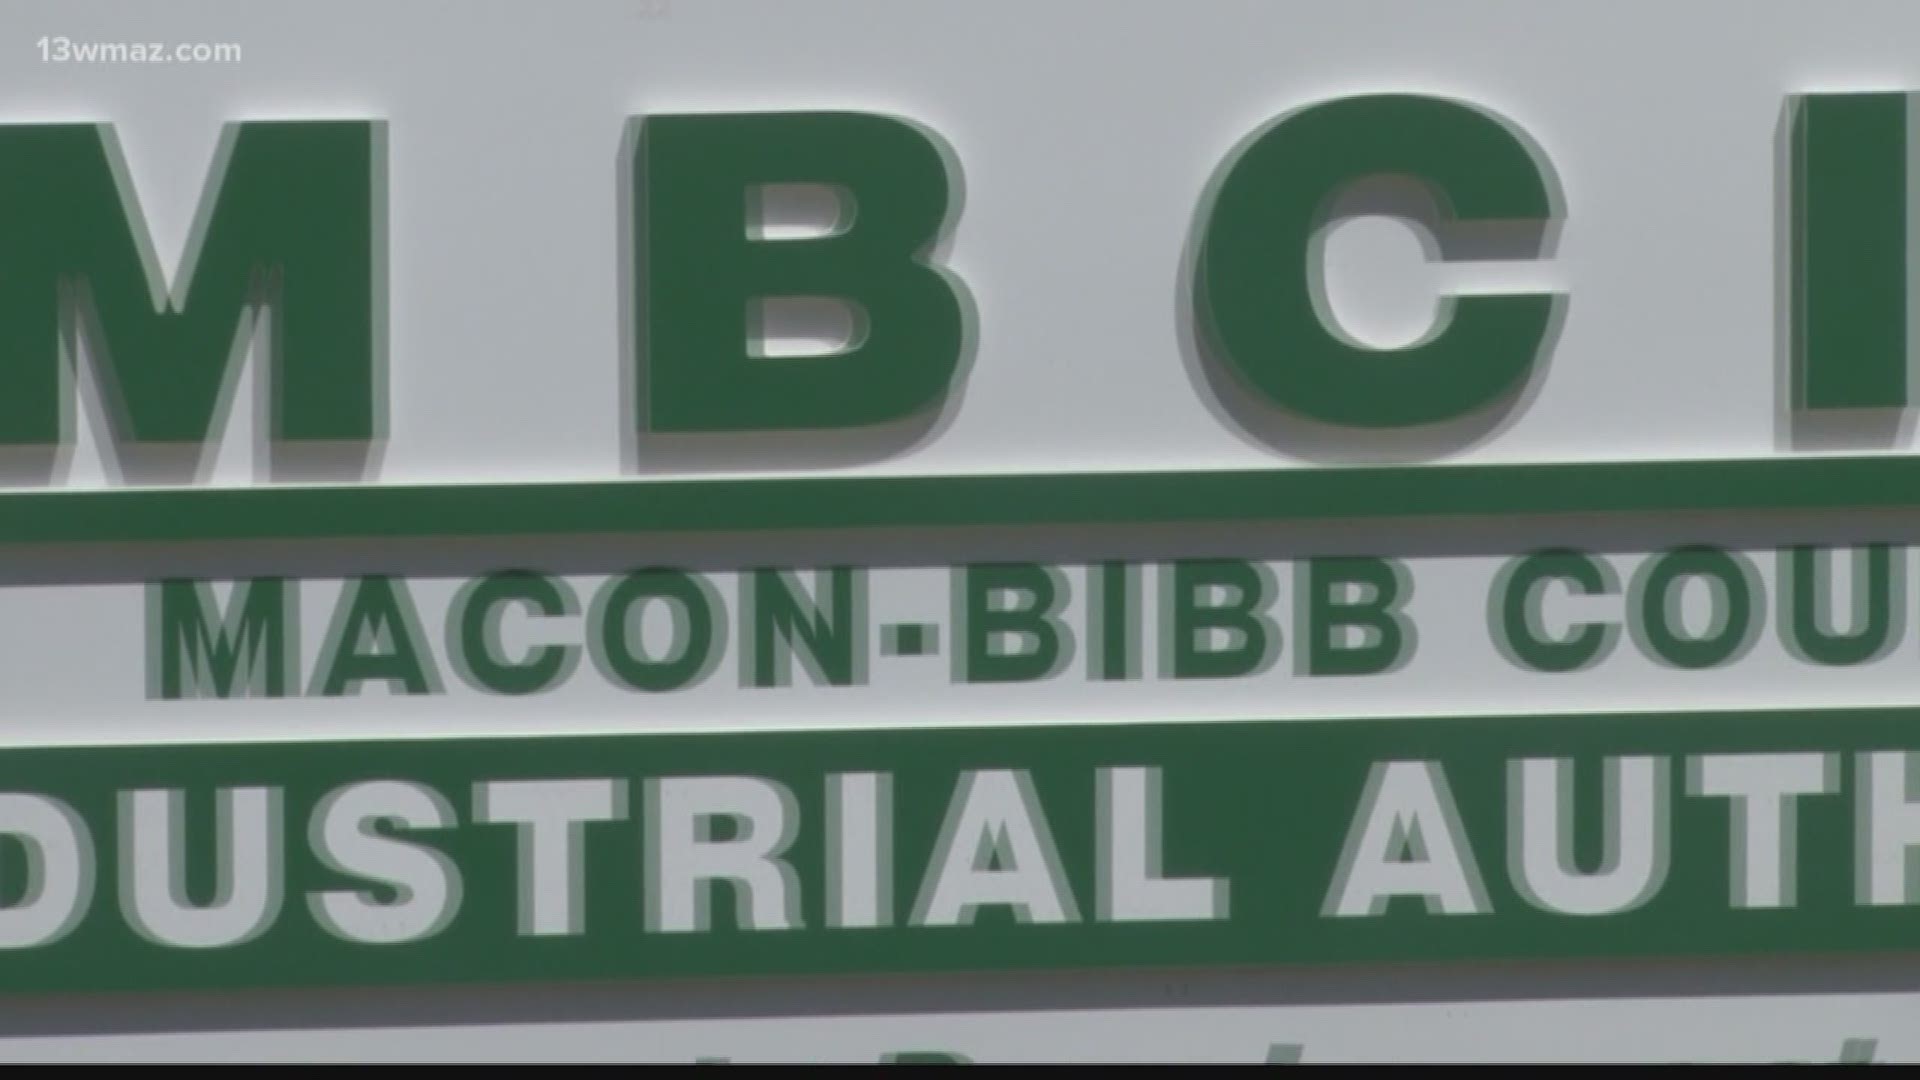 Bibb Industrial Authority makes changes